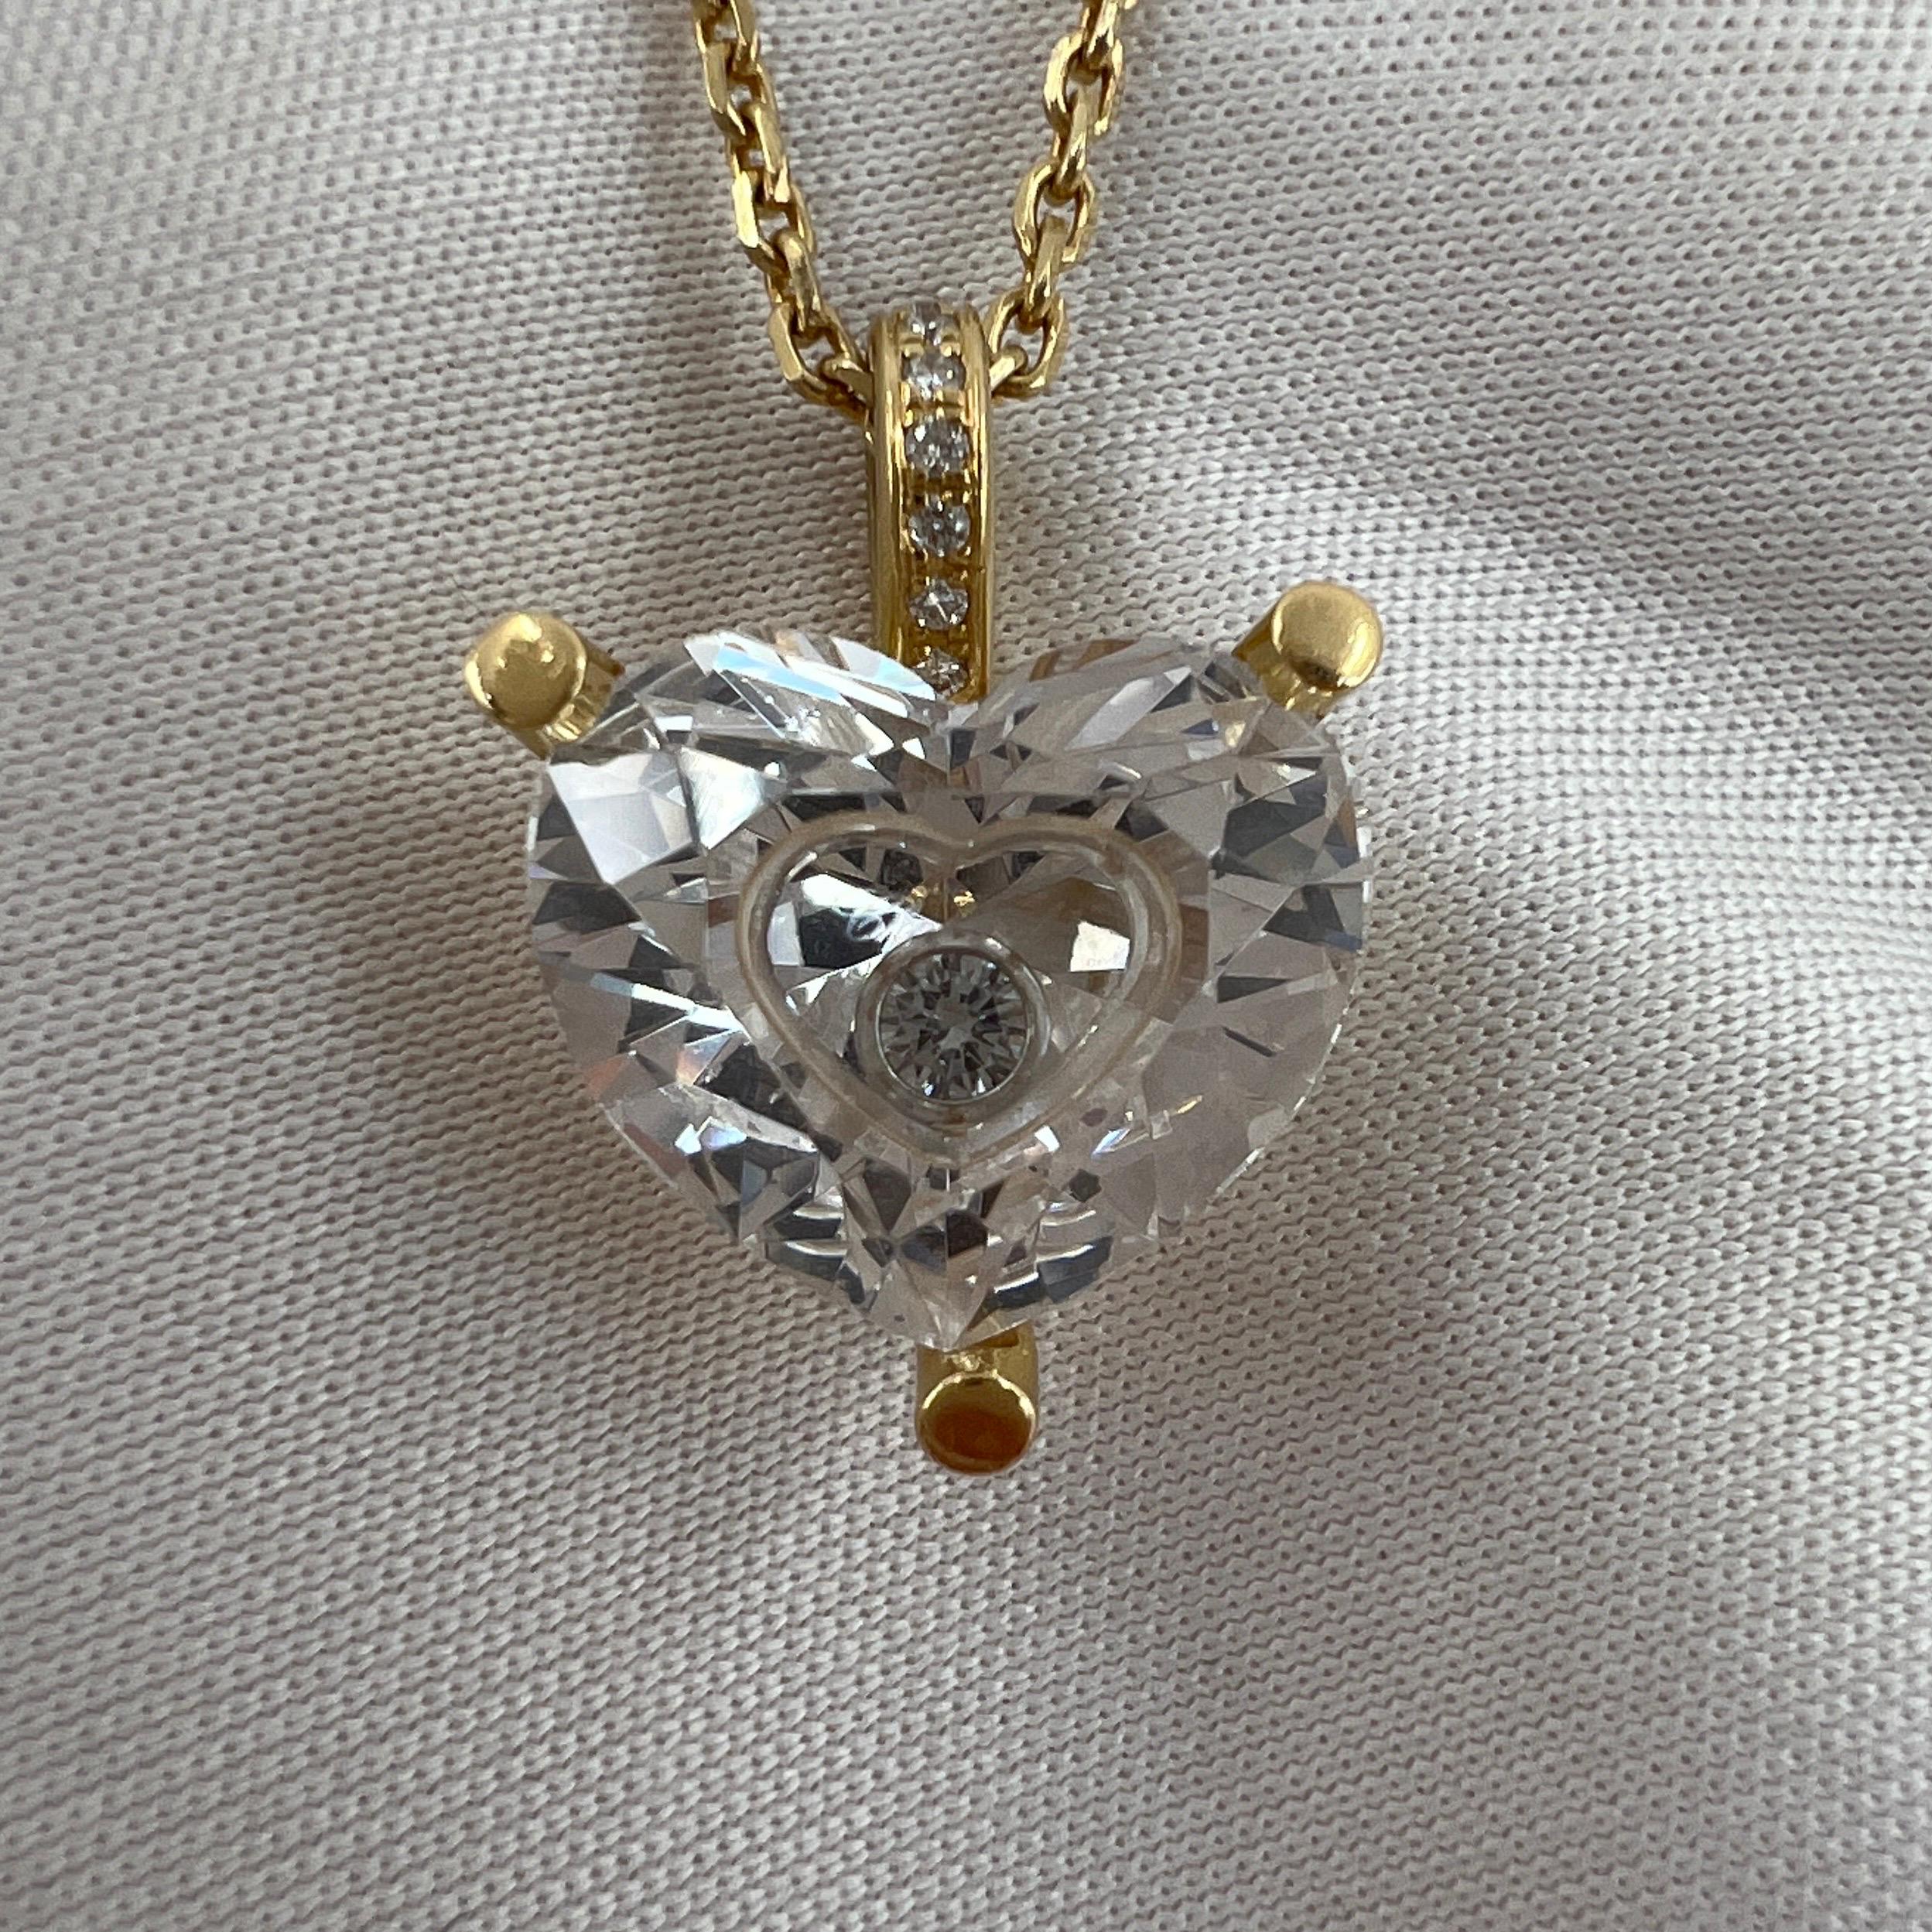 Heart Cut Chopard So Happy Diamonds Heart 18k Yellow Gold Pendant Necklace with Box